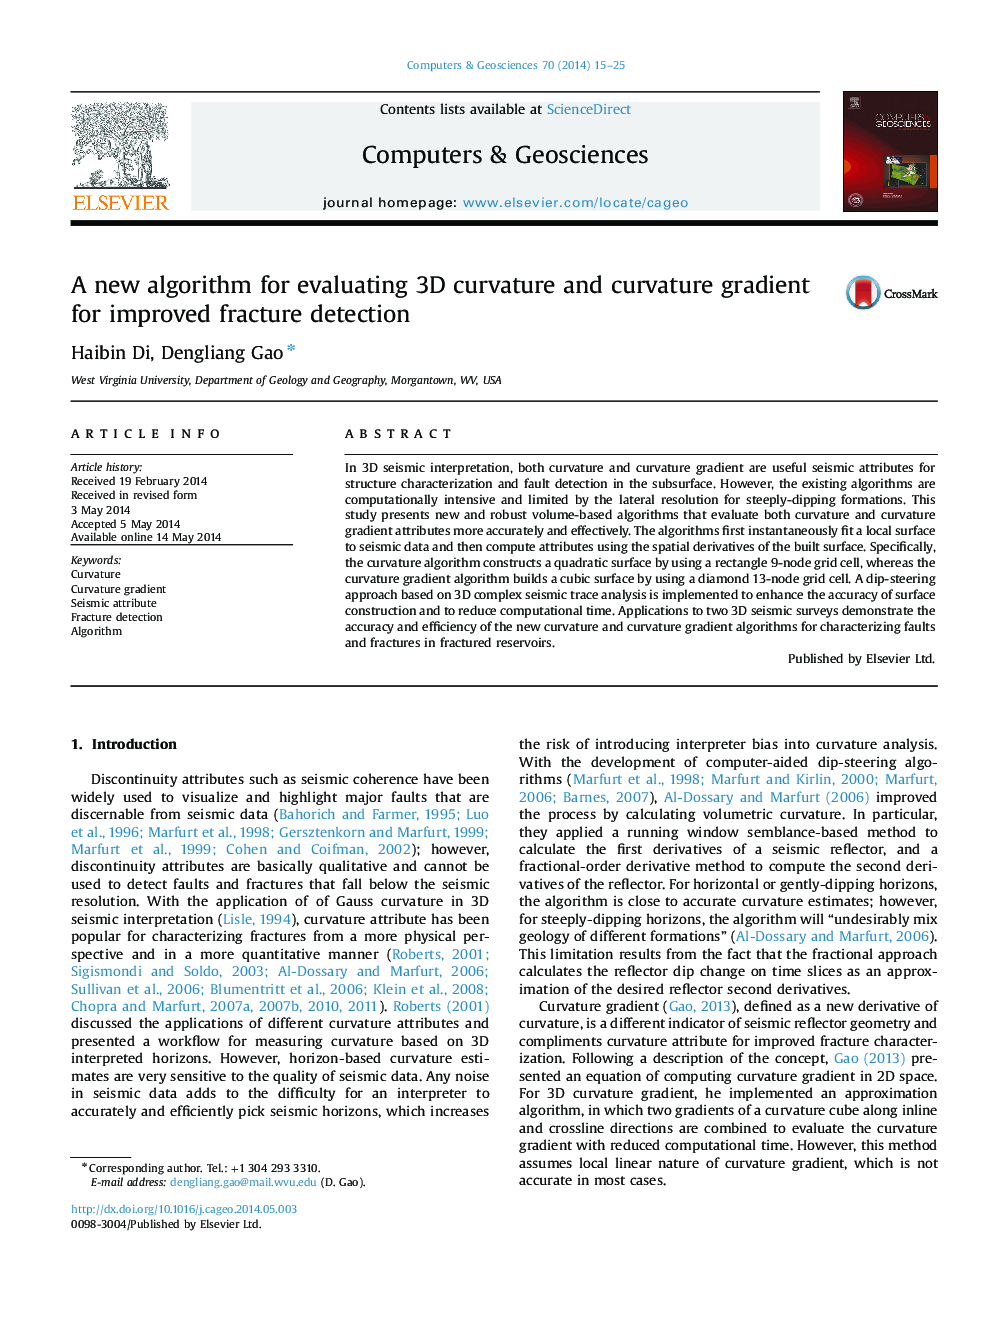 A new algorithm for evaluating 3D curvature and curvature gradient for improved fracture detection